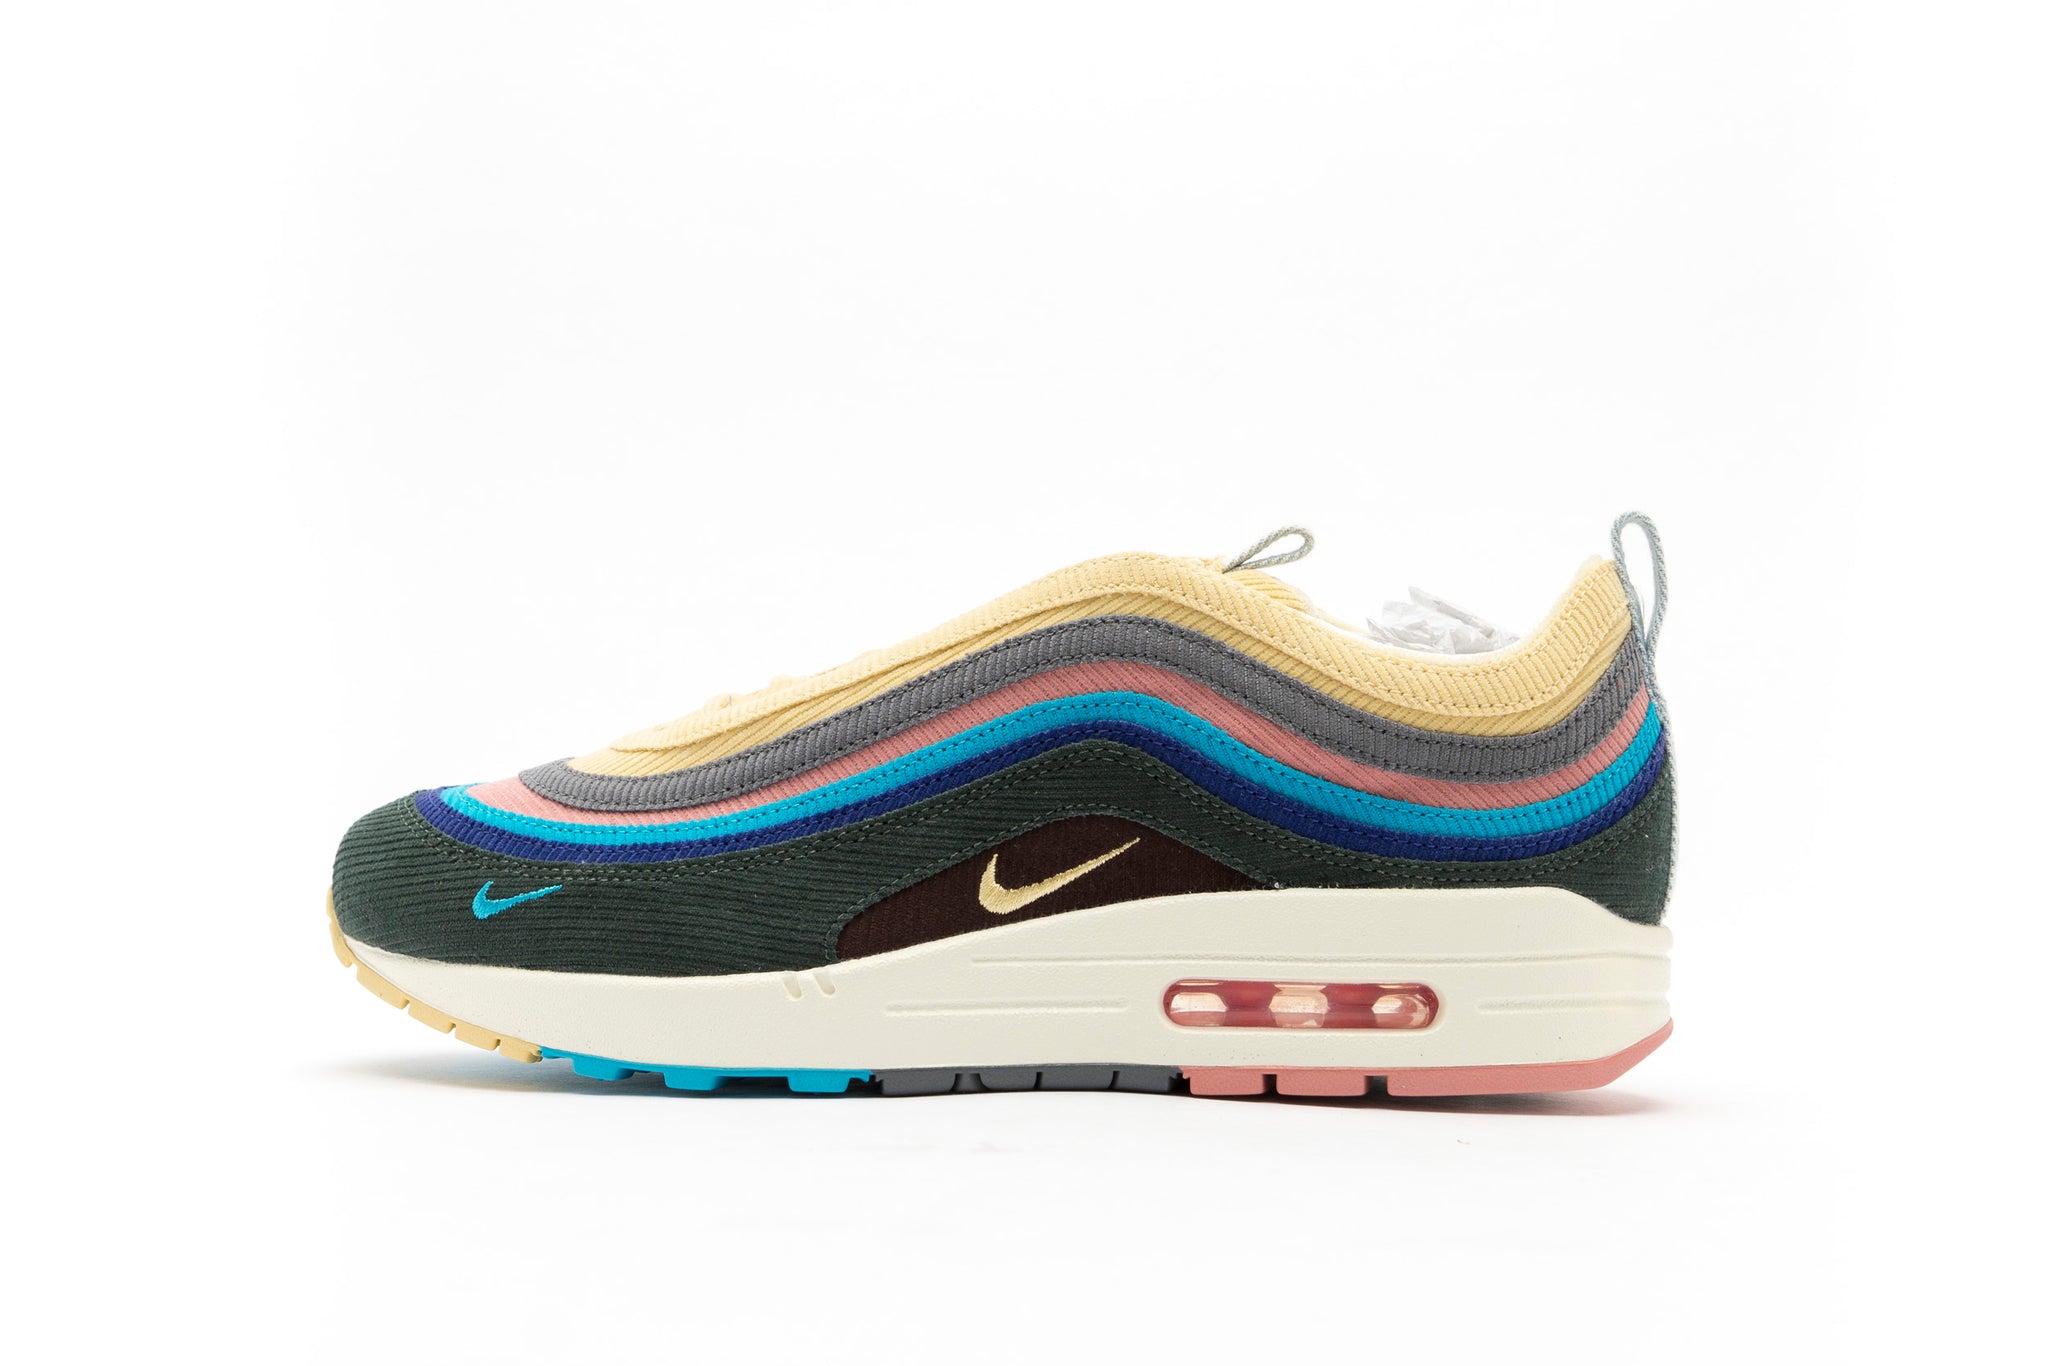 Sean Wotherspoon x Air Max 1/97 